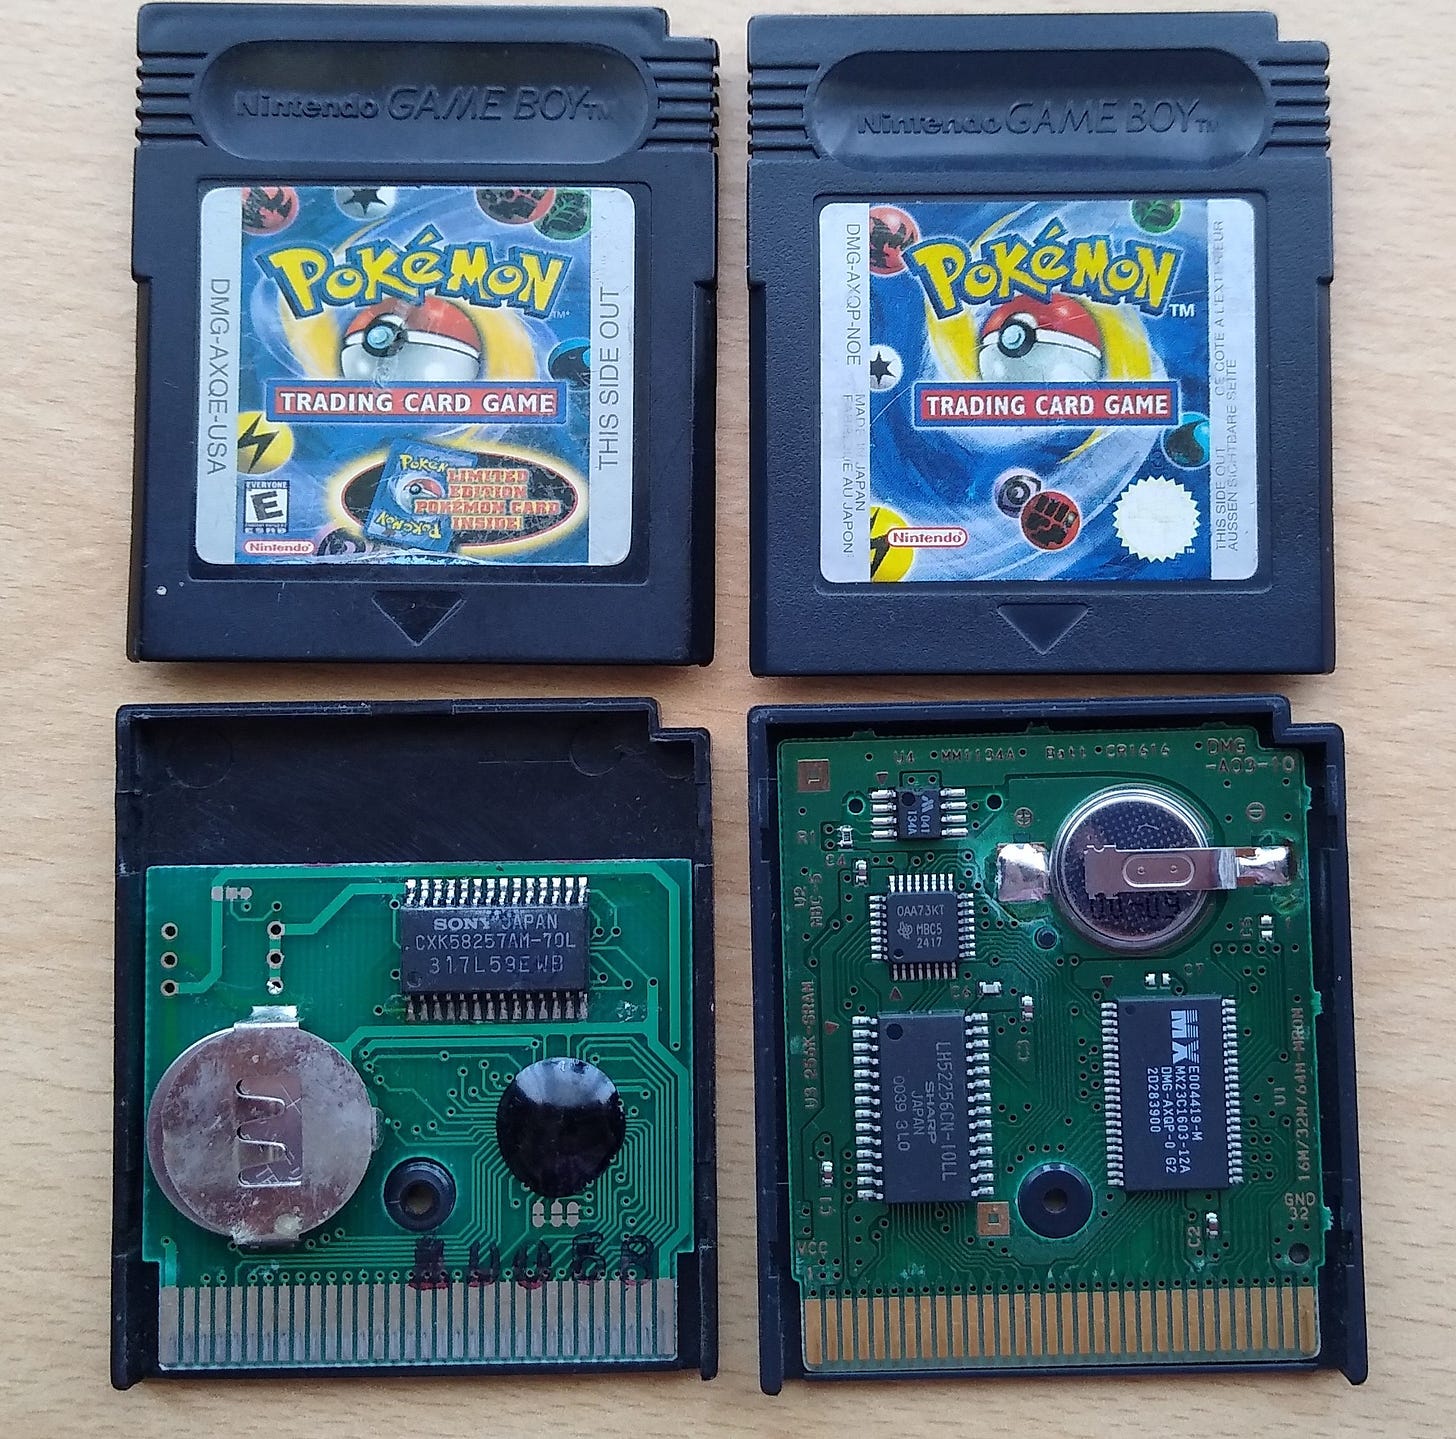 Two copies of Pokémon Trading Card Game for Game Boy. On the left (top and bottom) is the fake, with the easy to spot eproxy blob, and on the right (top and bottom) is the genuine copy, with a much higher quality build (Photo credit: Johto Times)